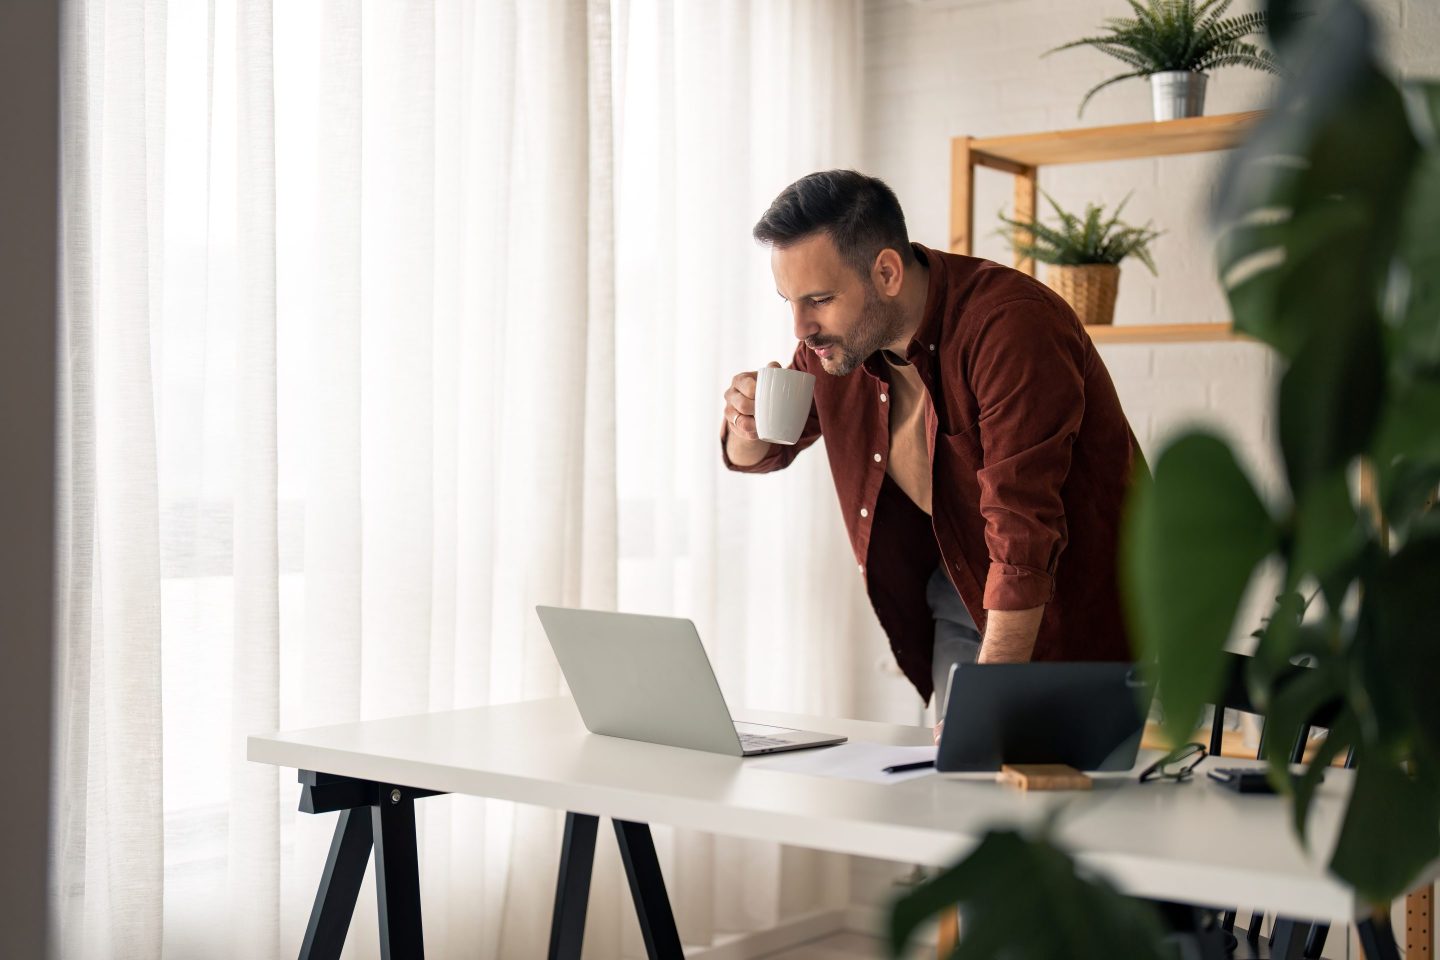 Handsome stylish man in casual clothes looking at laptop computer screen enjoying coffee in home office room during the day while standing and leaning with one hand on table next to window with white curtains.